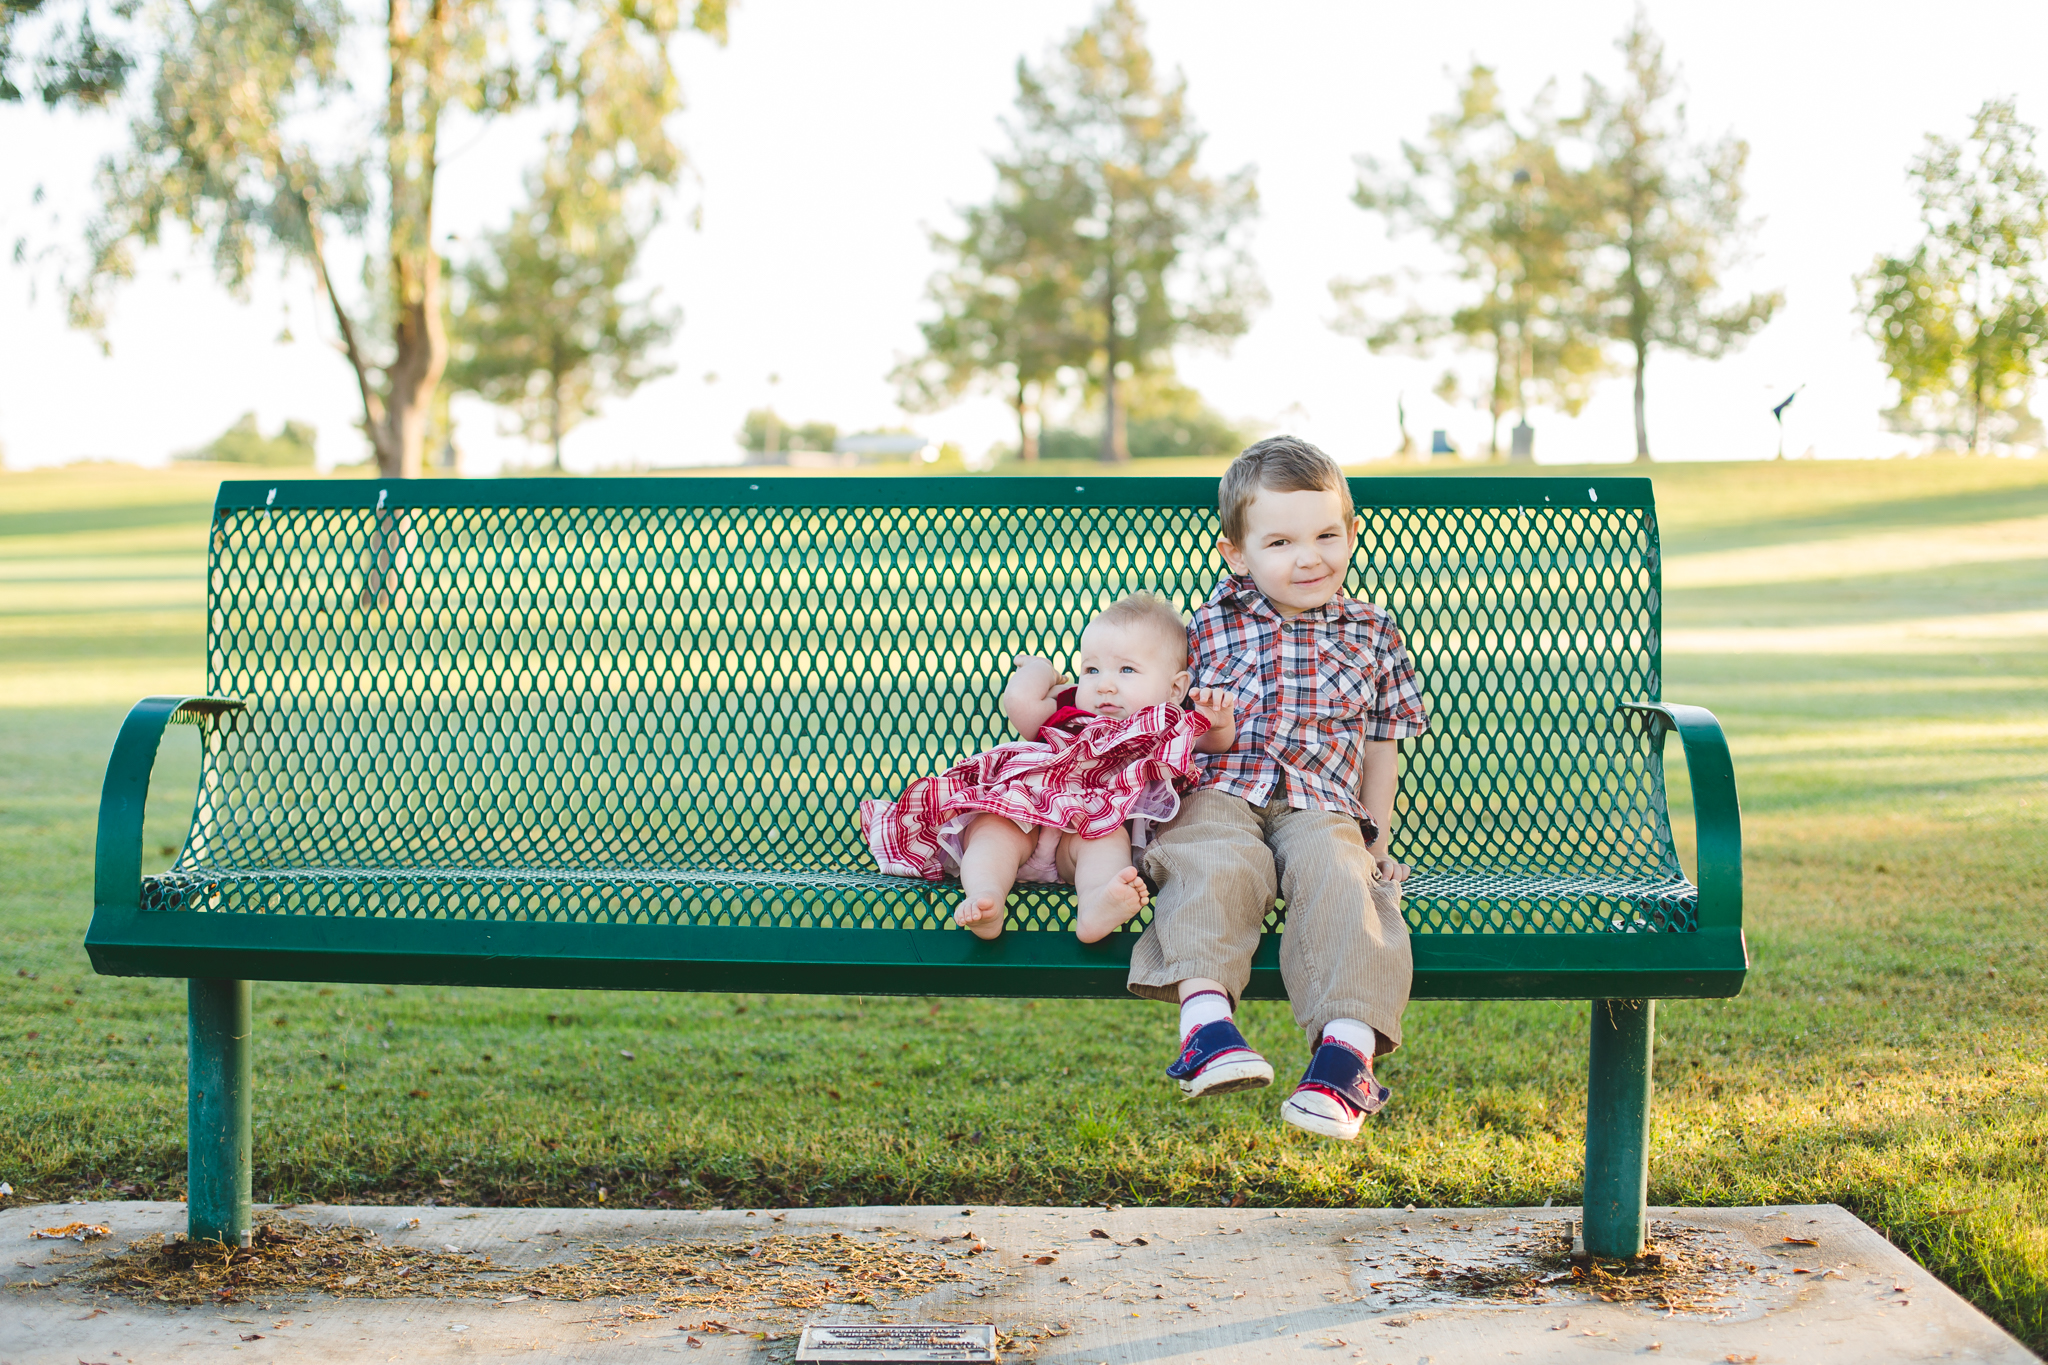 reed and amelia share a bench